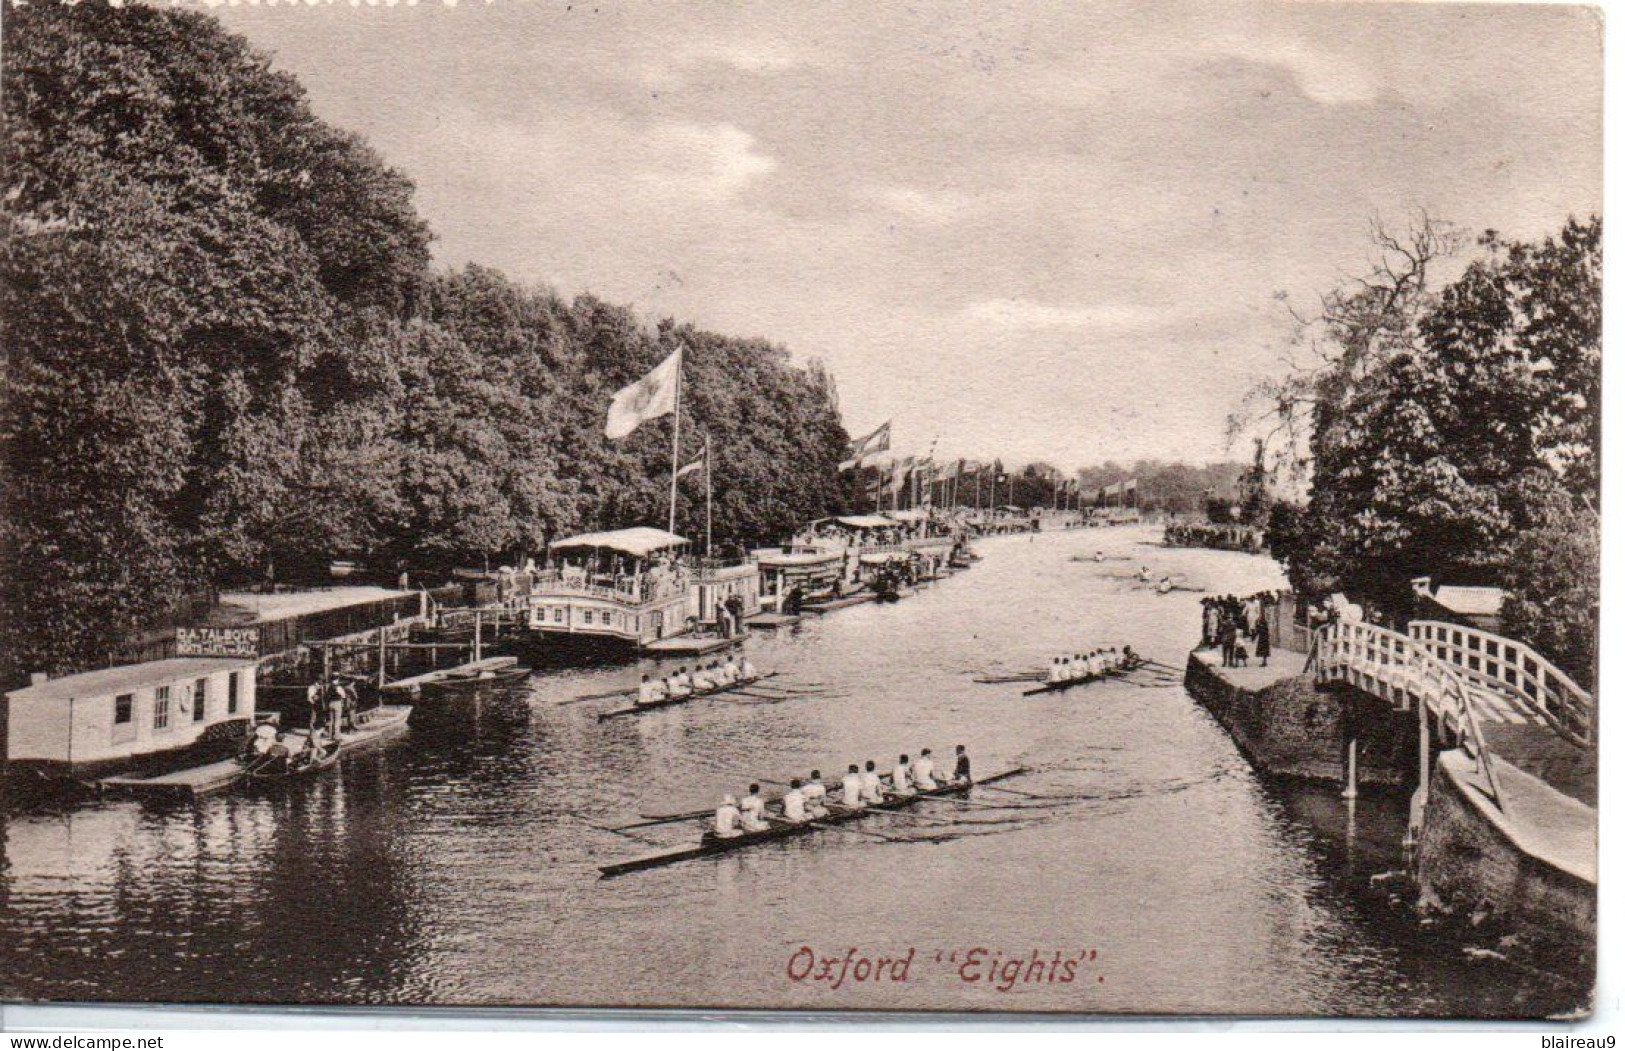 Eights - Oxford